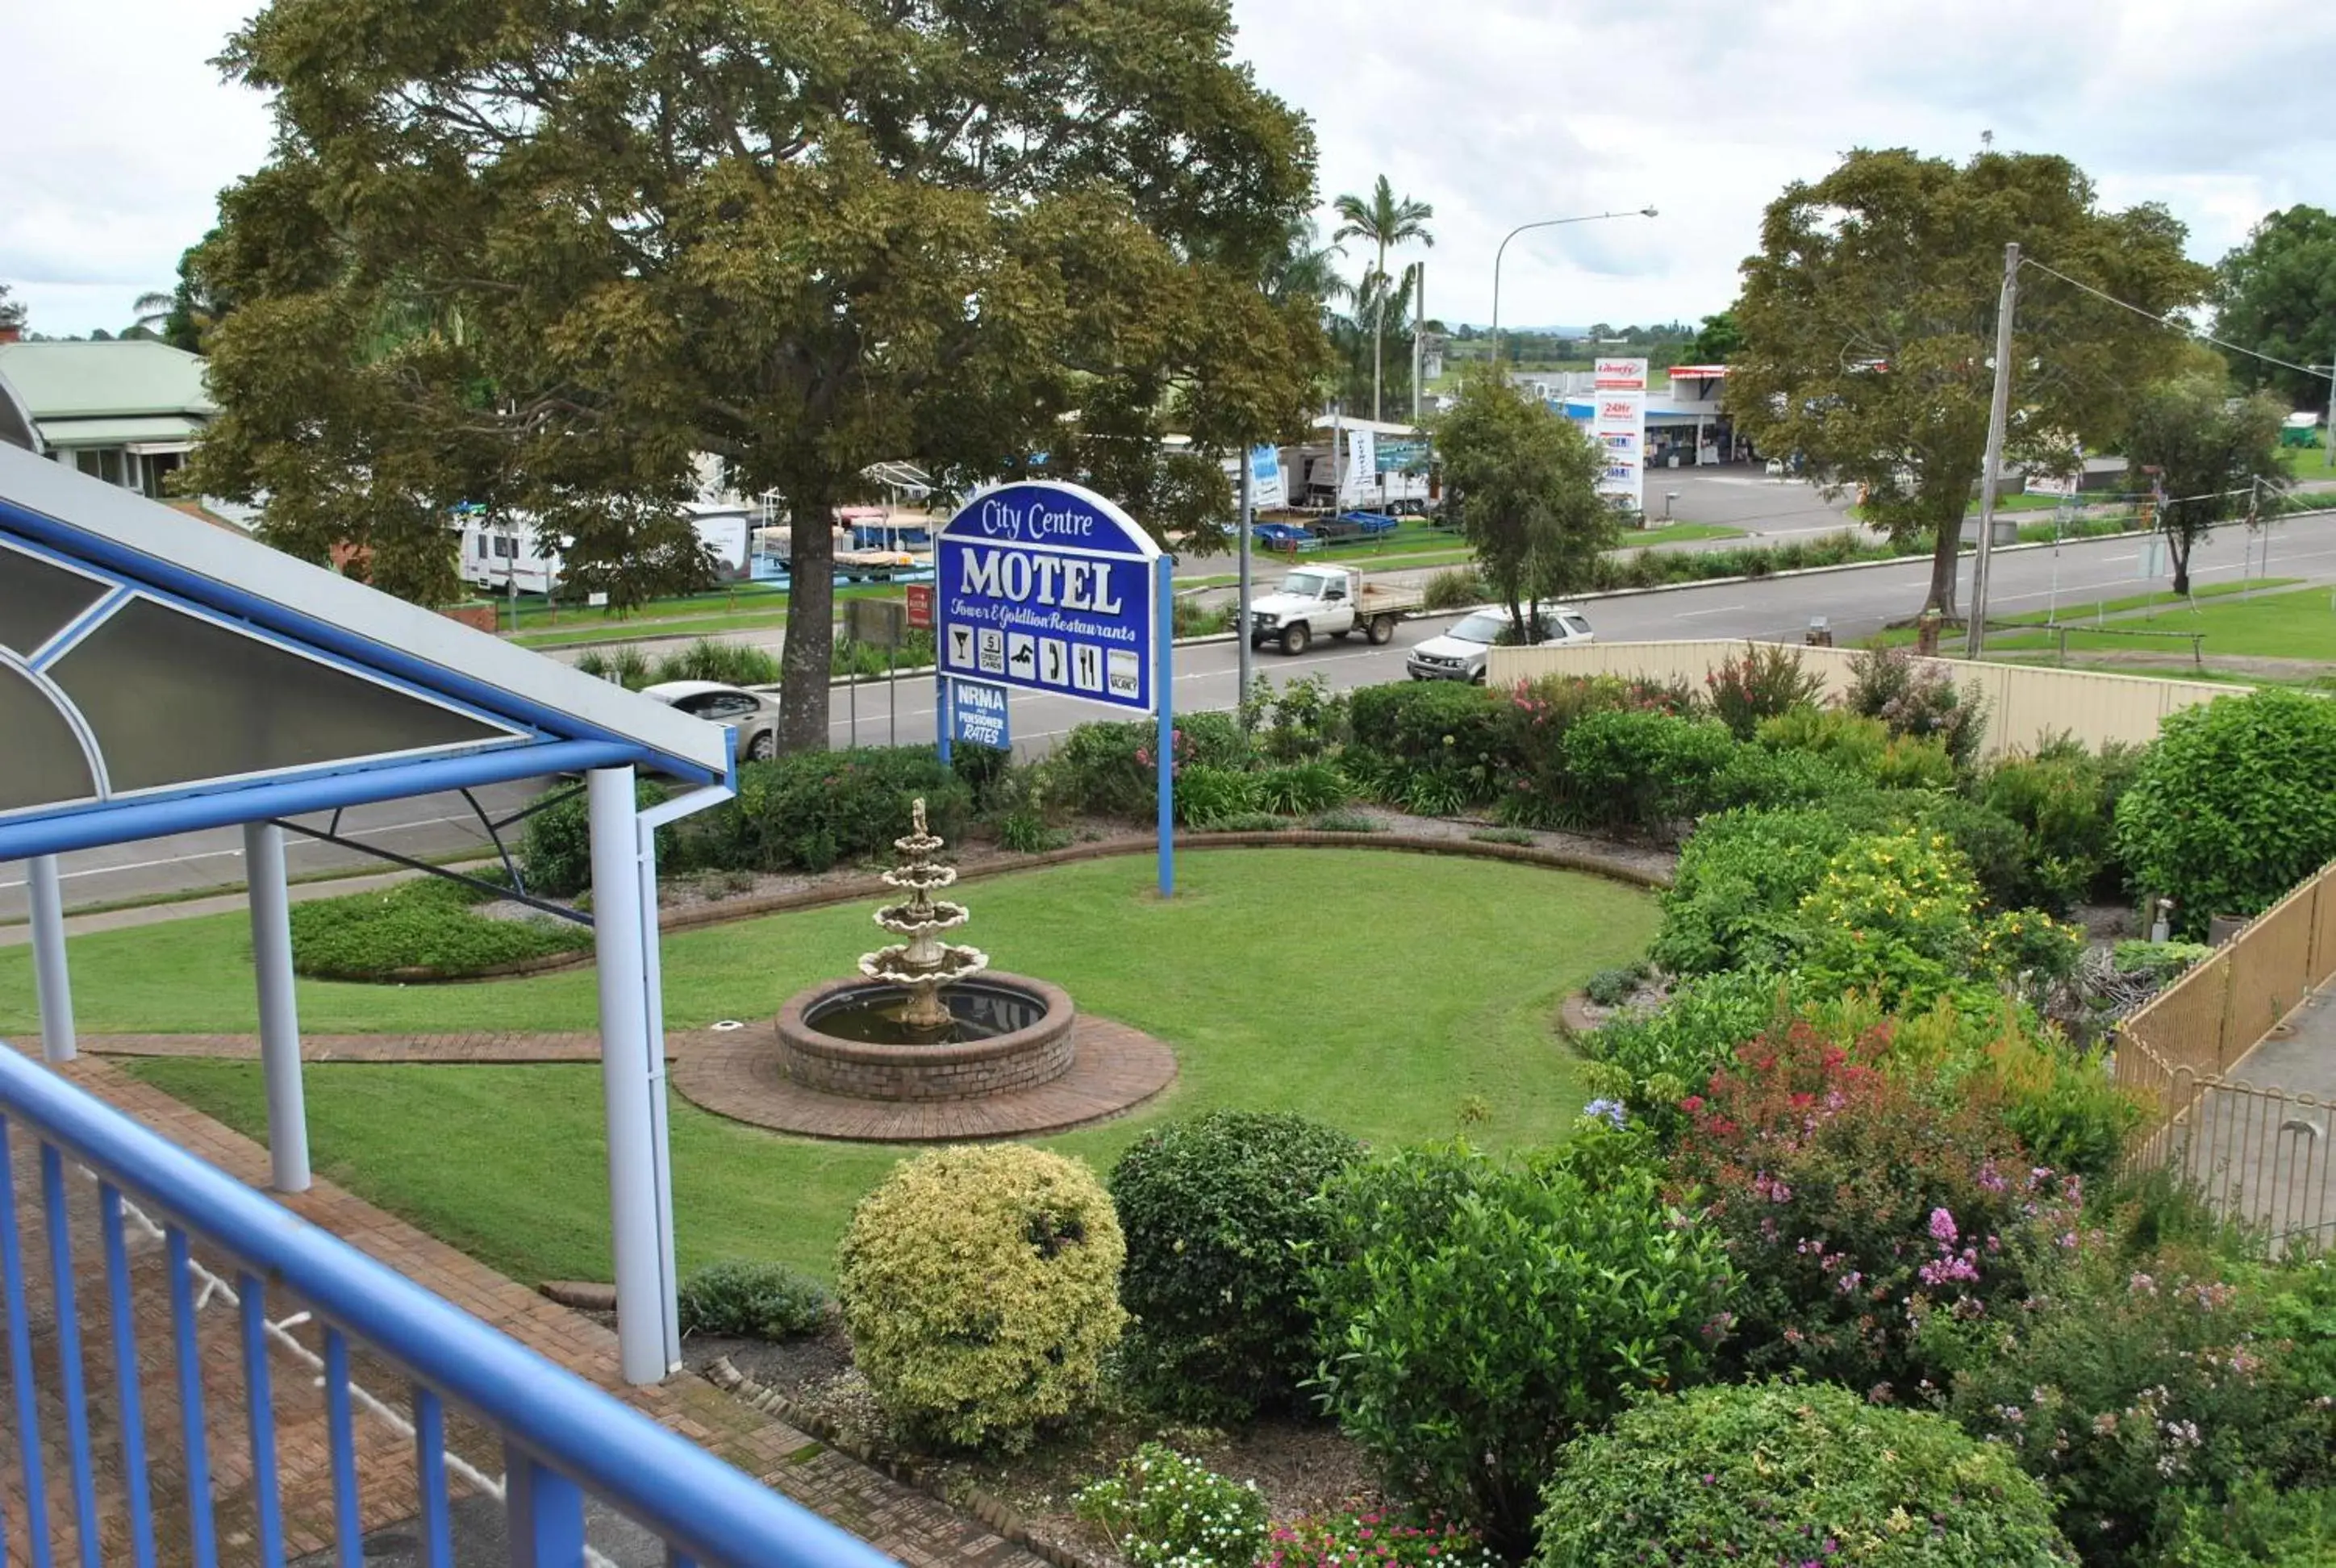 Day in City Centre Motel Kempsey